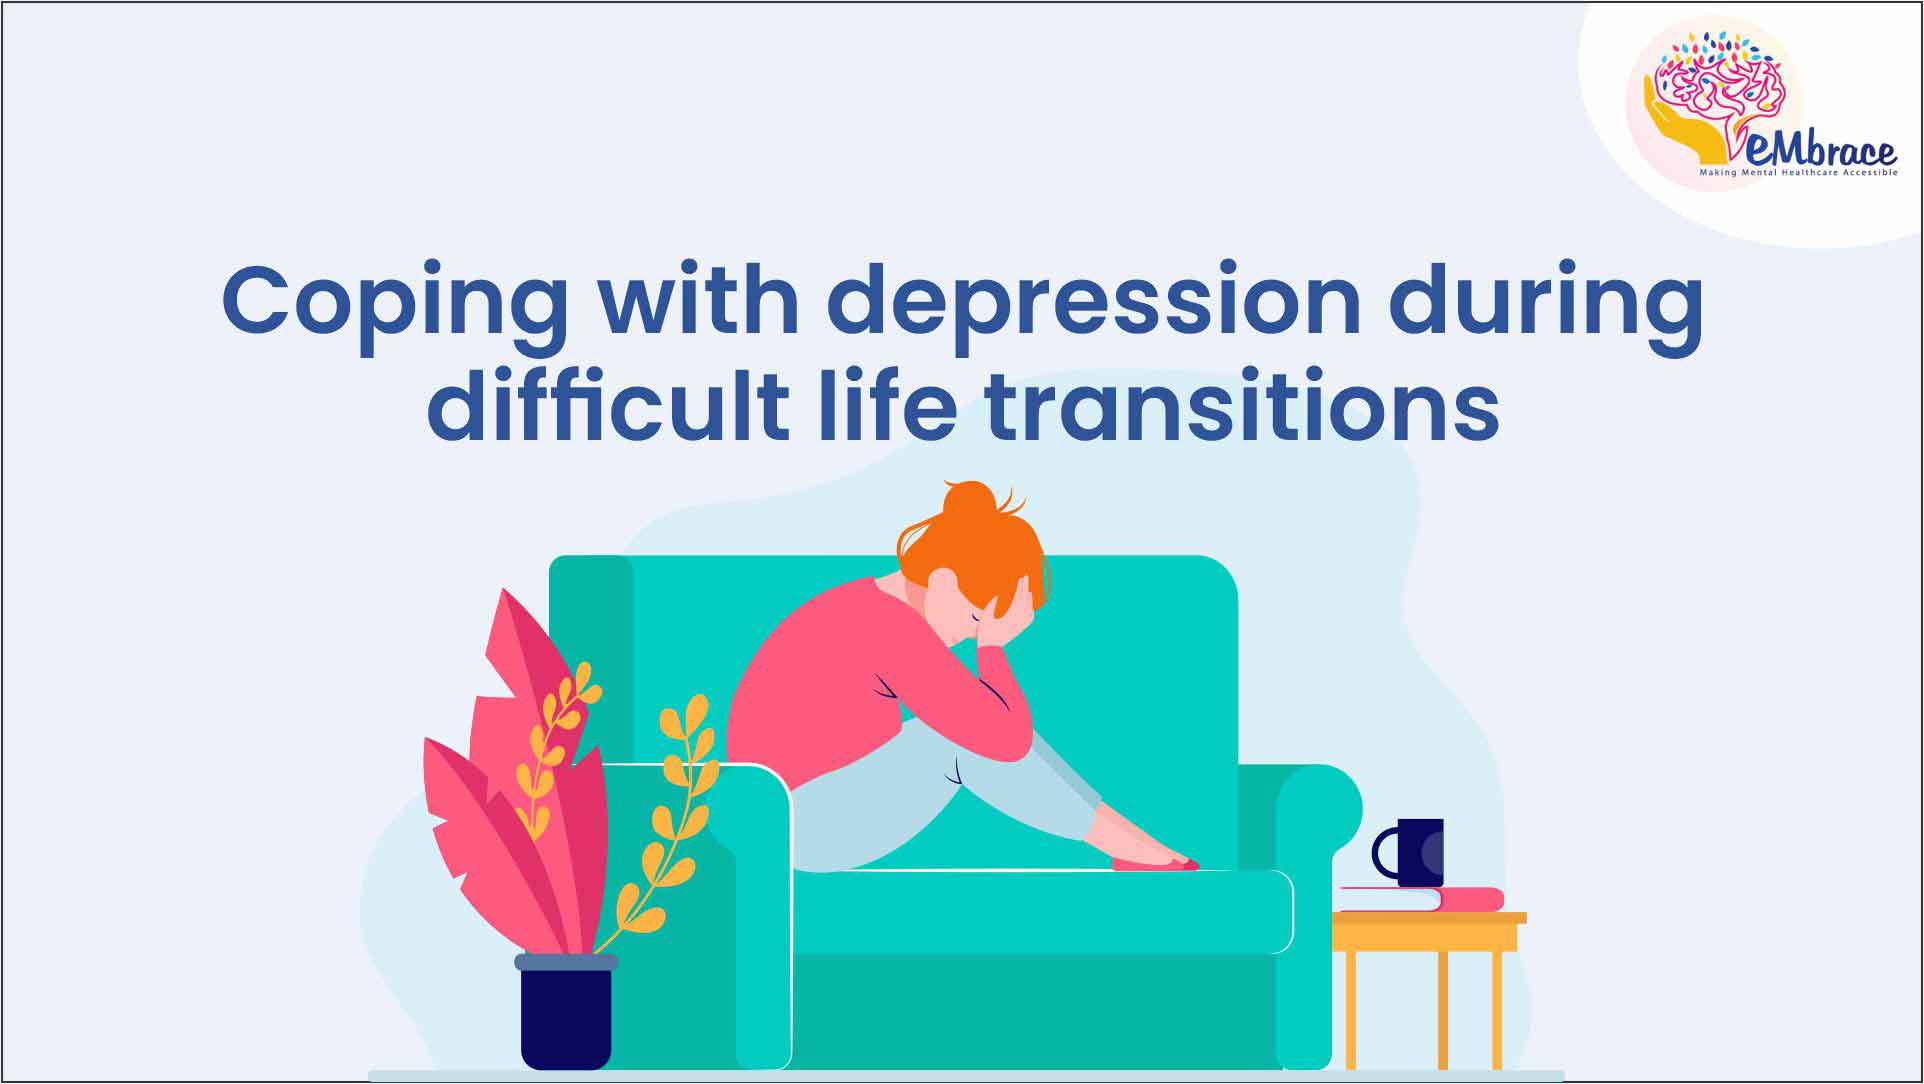 Coping with depression during difficult life transitions